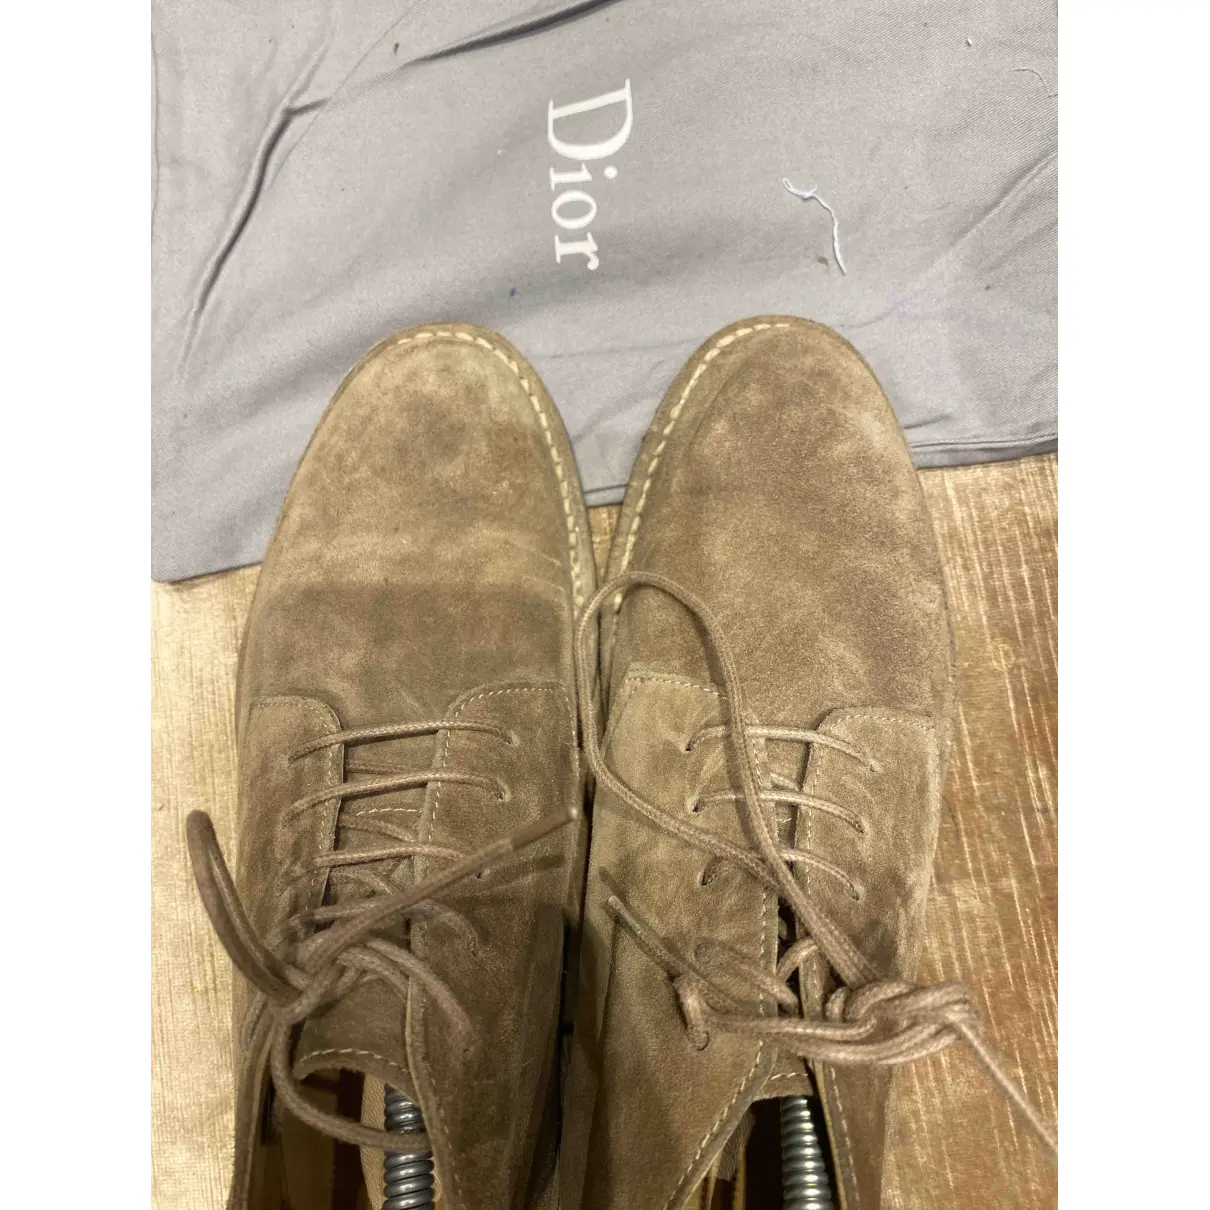 Lace ups Dior Homme